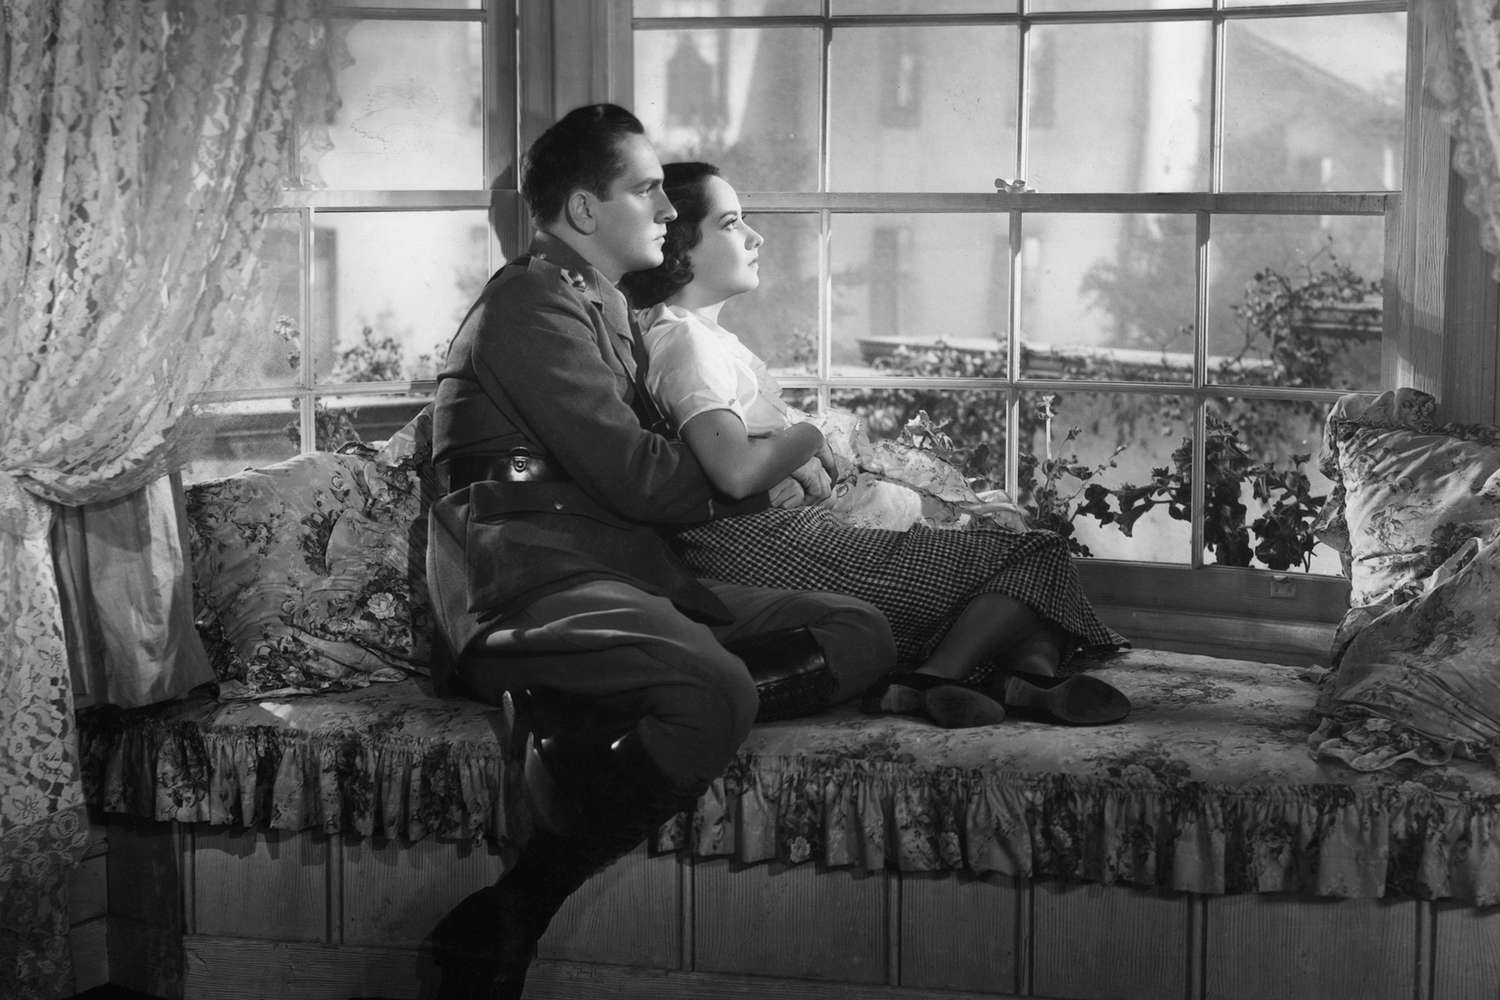 Fredric March holding Merle Oberon by the window in a scene from the film 'The Dark Angel', 1935. (Photo by United Artists/Getty Images)